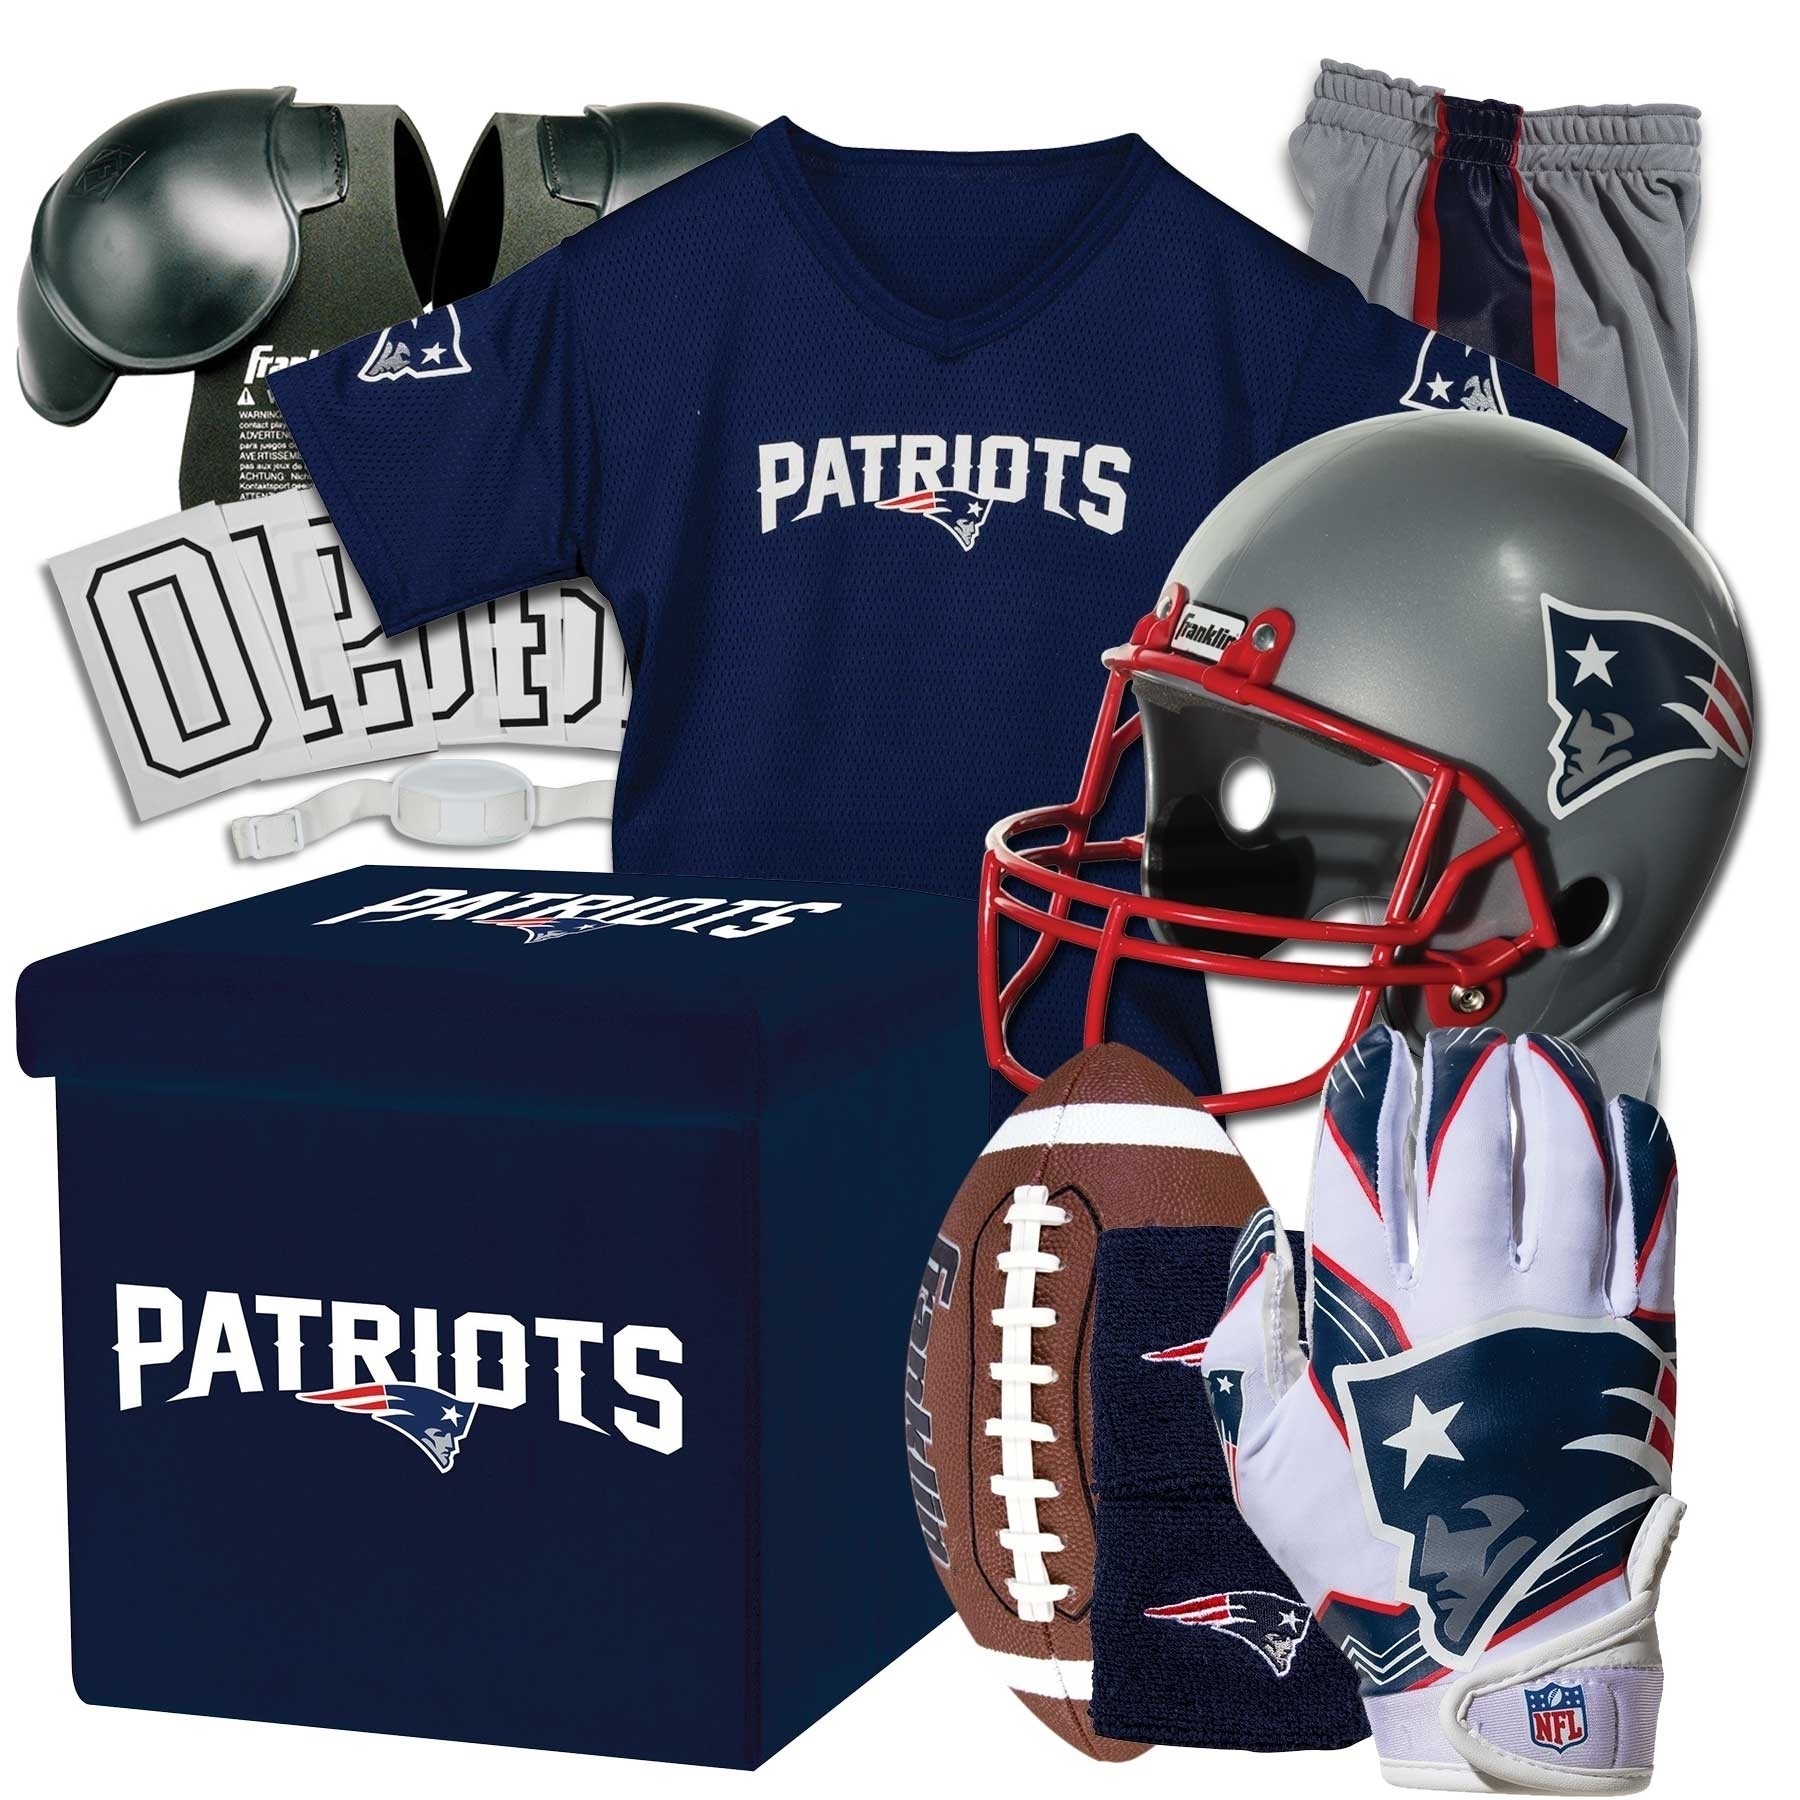 nfl gift box with jersey